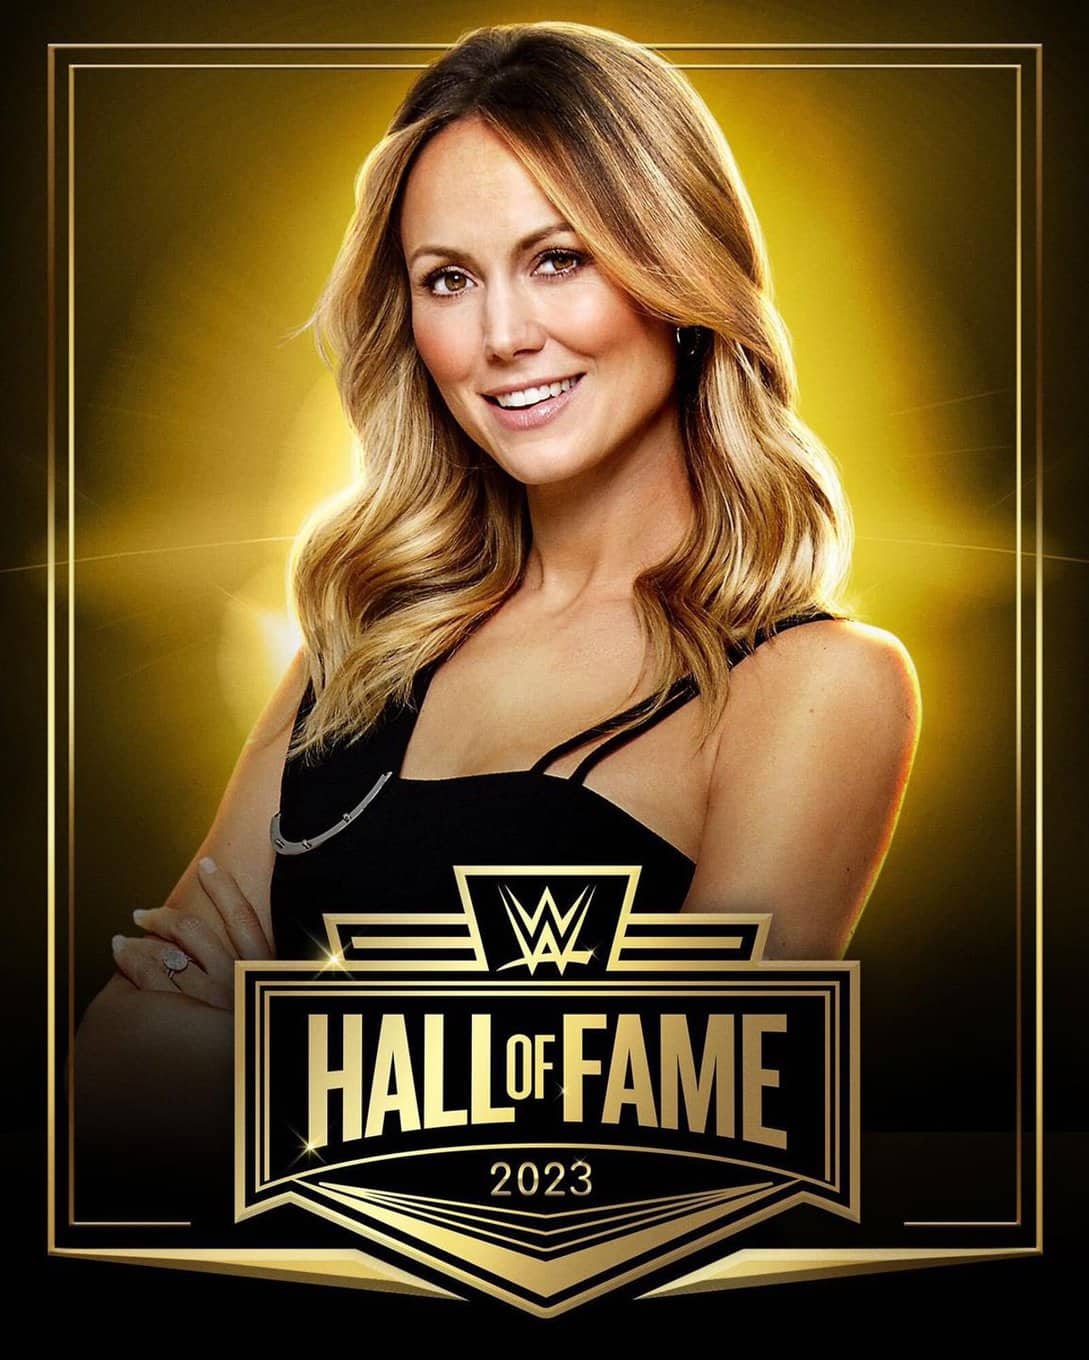 WWE Hall Of Fame 2023 Next Inductee Is Stacy Keibler! Inside Pulse